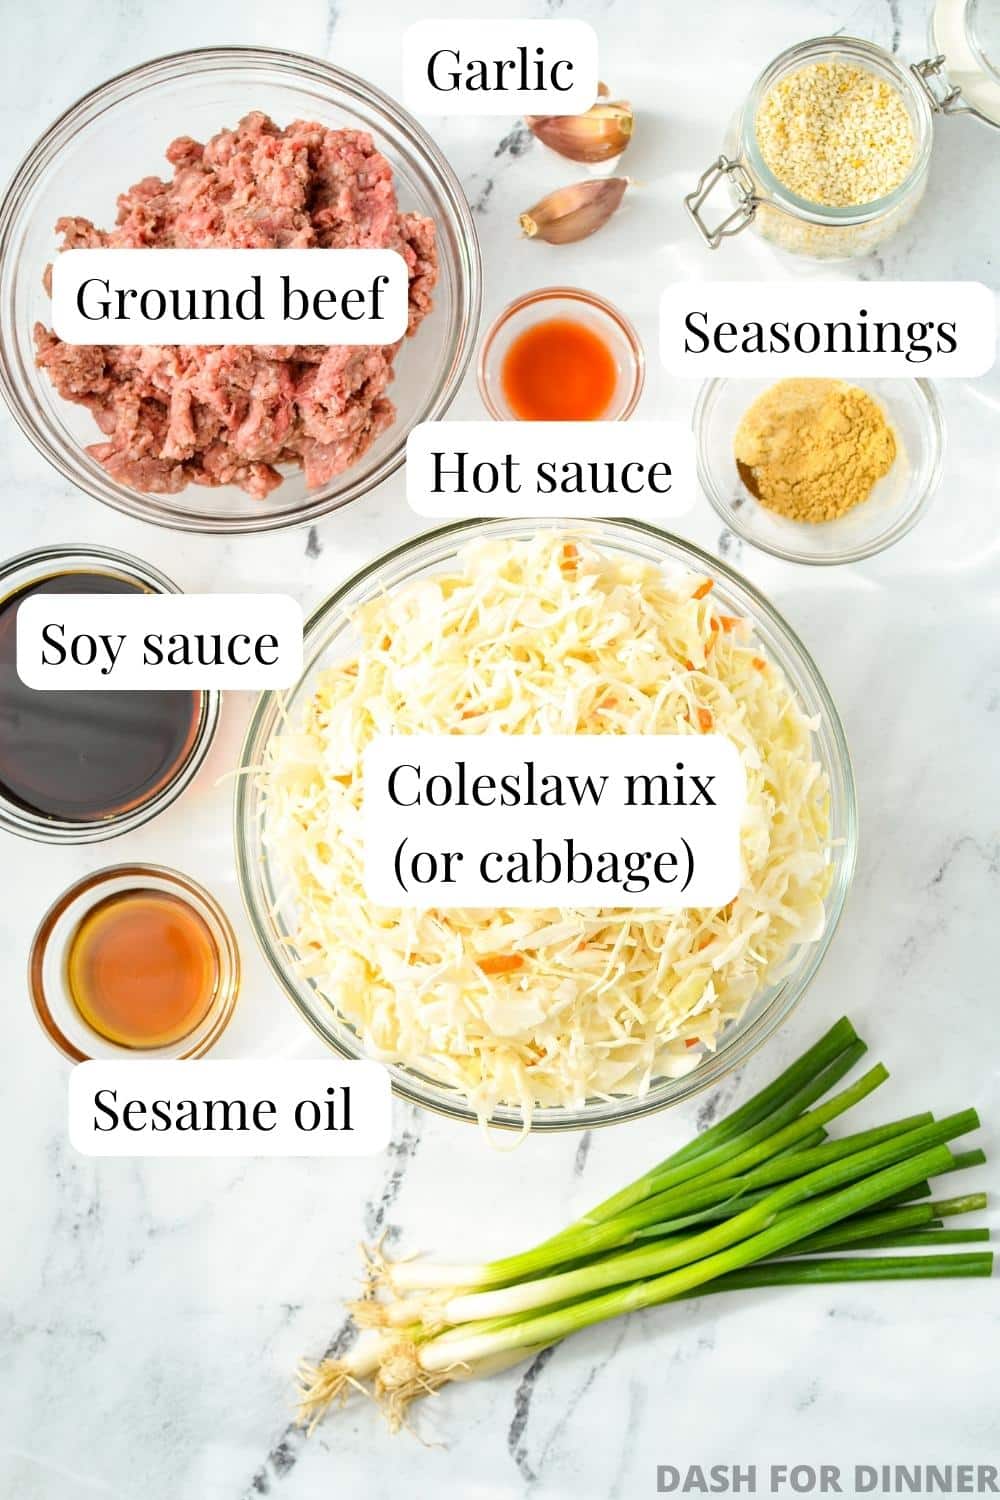 The ingredients needed to make inside out egg roll: cabbage, ground meat, and seasonings.